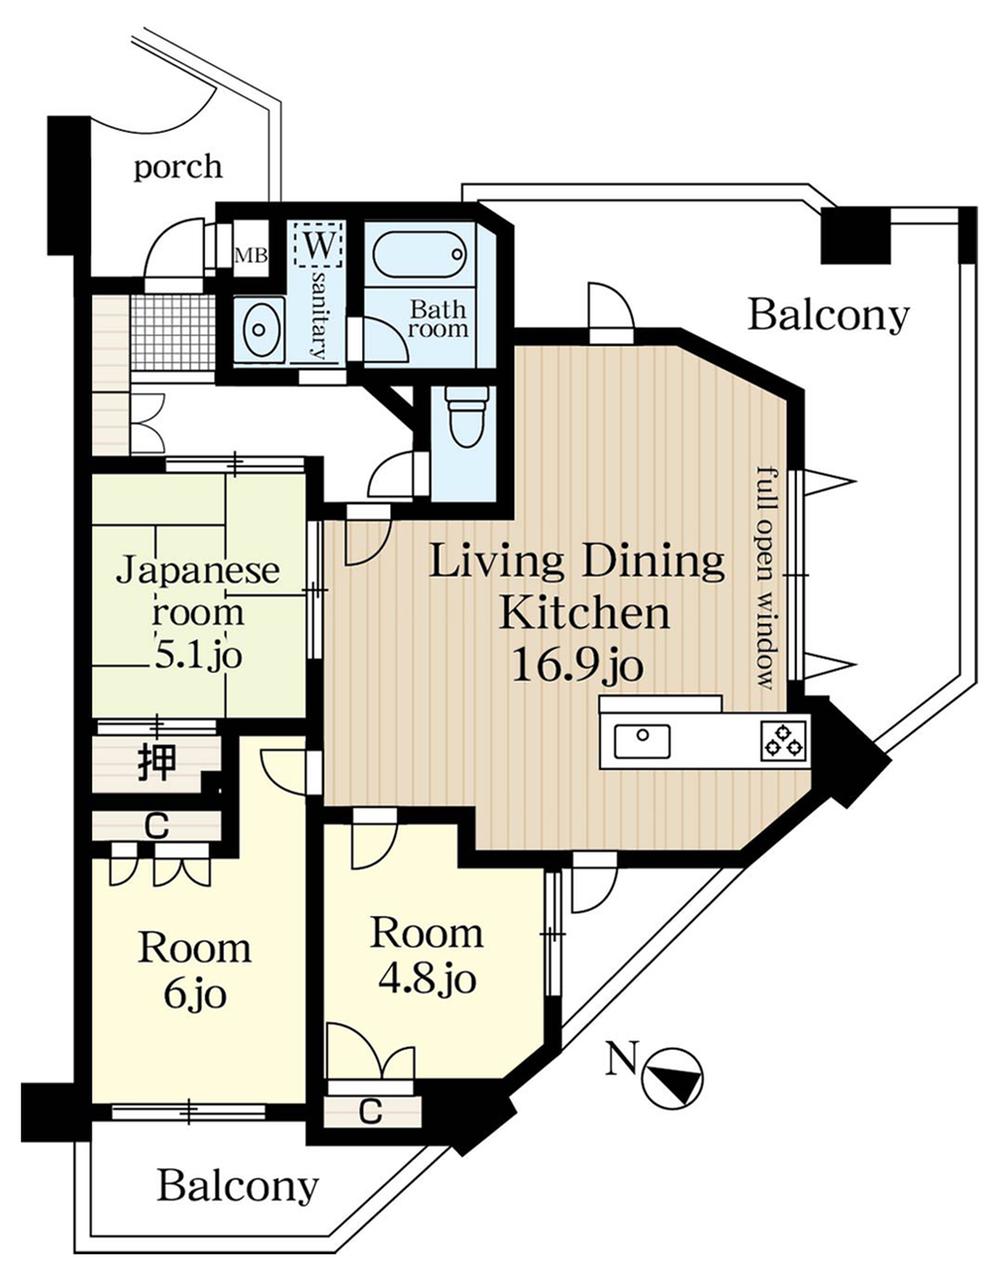 Floor plan. 3LDK, Price 25,800,000 yen, Occupied area 69.81 sq m , It was changed balcony area 17.81 sq m price! Of self-financing small customers, Please consult!